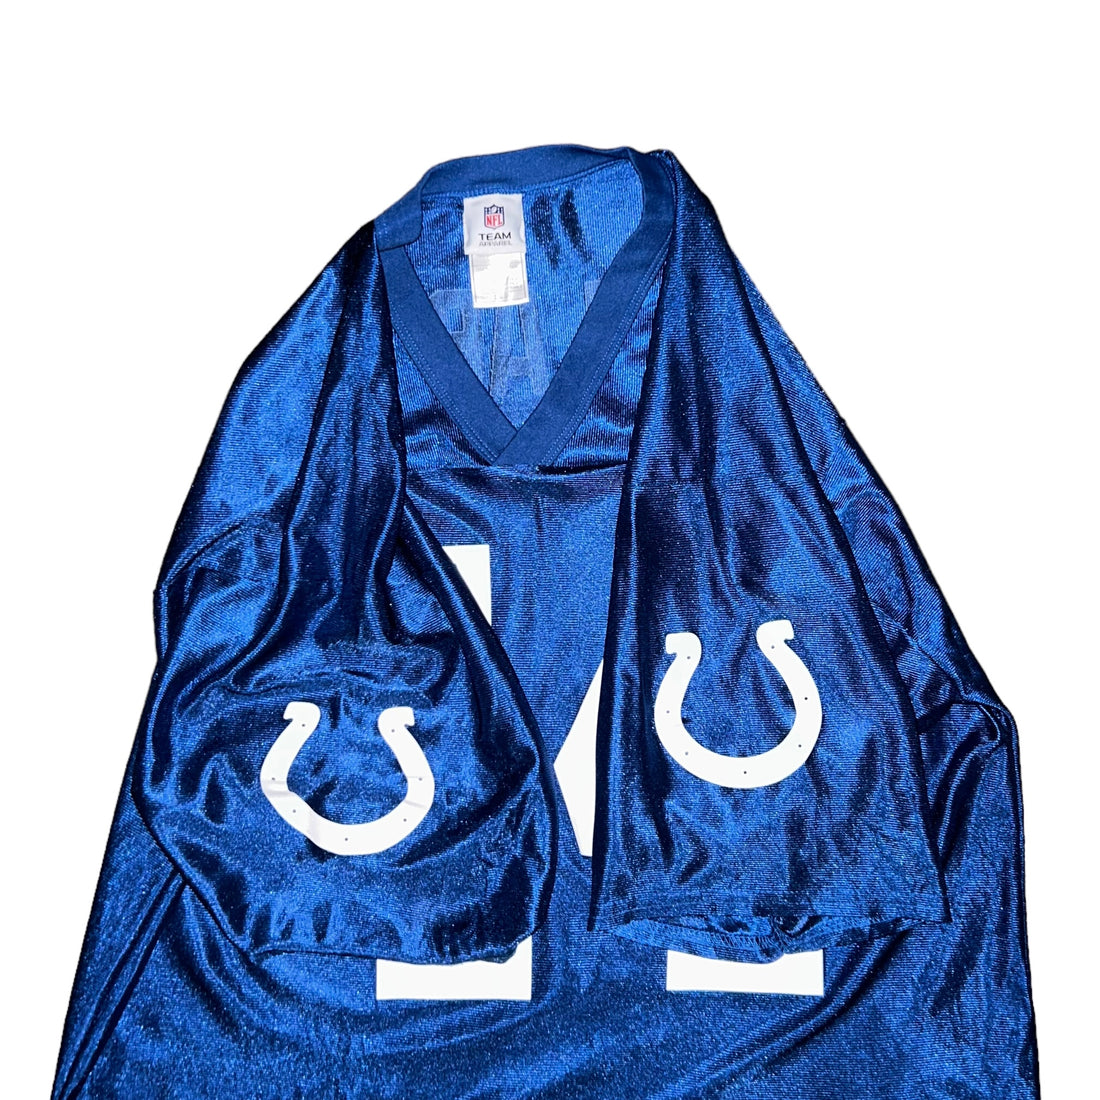 Jersey NFL Indianapolis Colts Team Appareal (L)